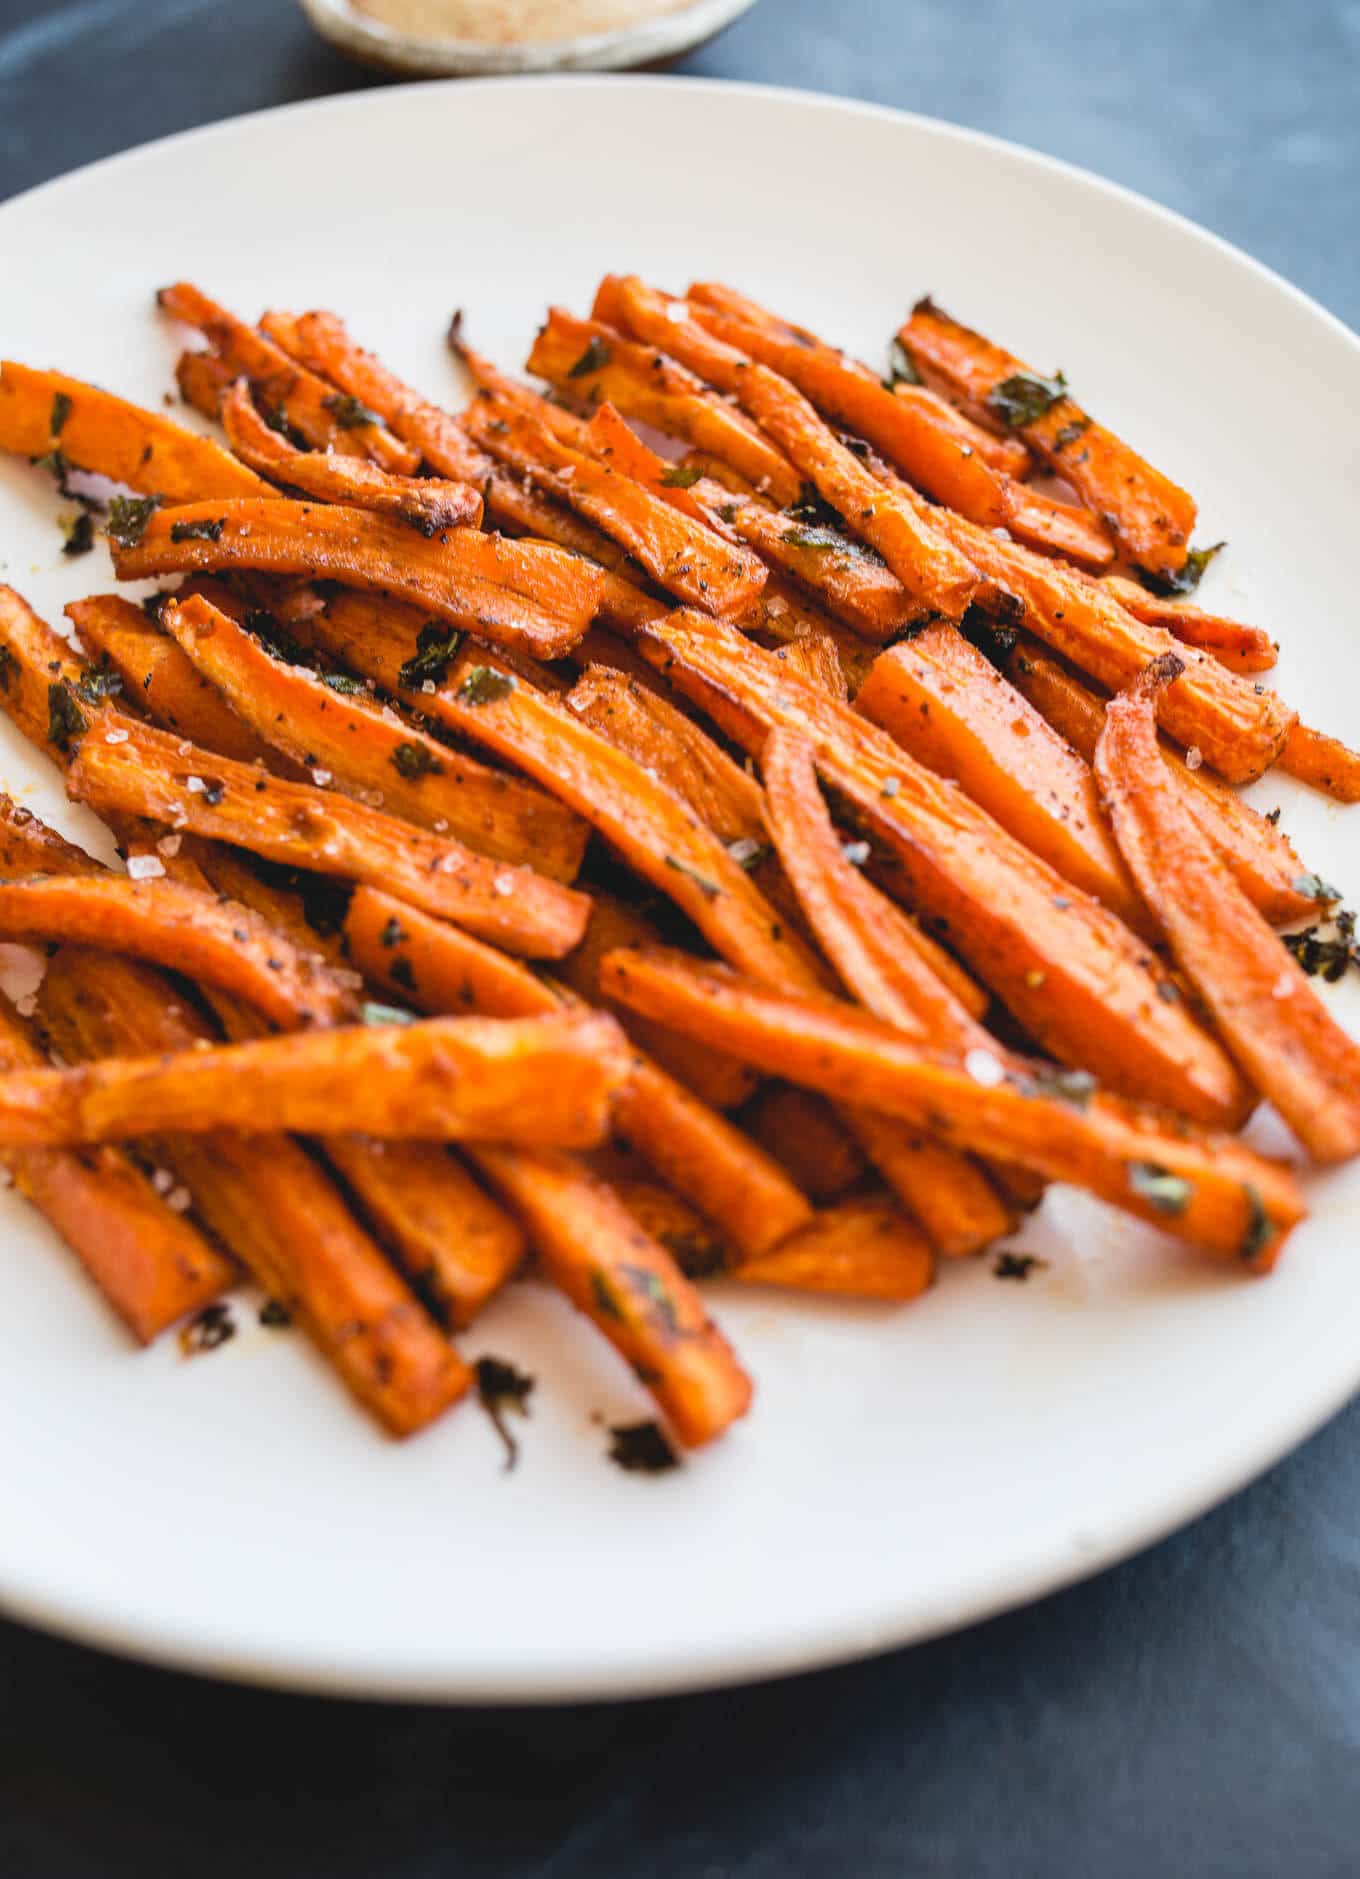 Oven Baked Carrot Fries tossed with olive oil, paprika, garlic powder, salt, pepper, and parsley, for a deliciously healthy snack recipe. Gluten-free, vegan. 